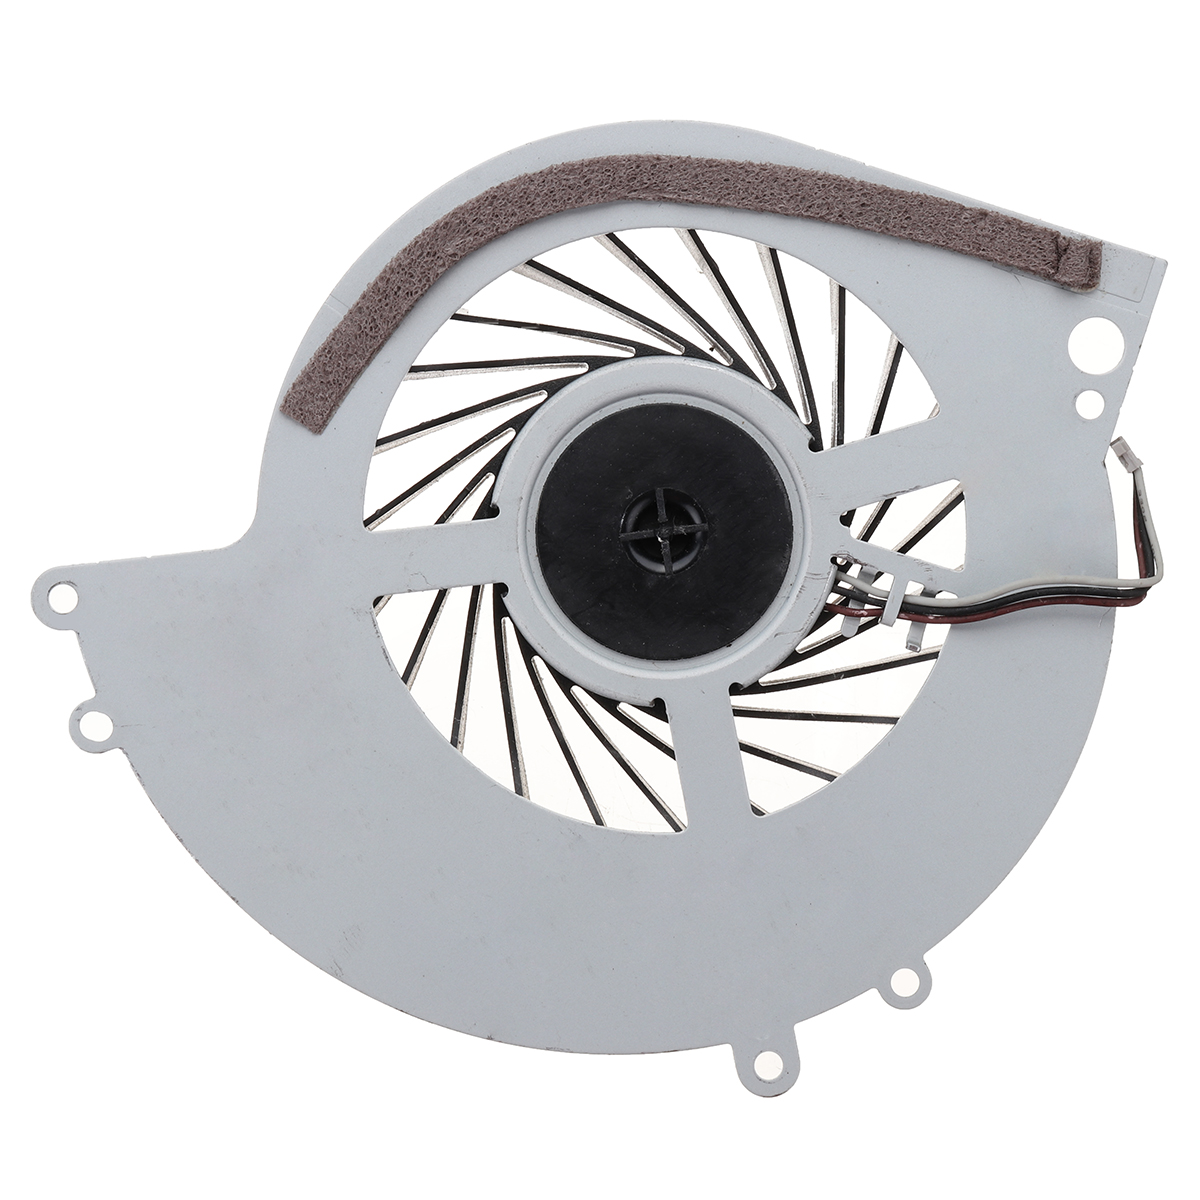 

Centechia 12V Internal Cooling Fan Replacement Built-in Cooler for Sony PS4 PS 4 Playstation 4 1000/1100 KSB0912HE Cooler Fan